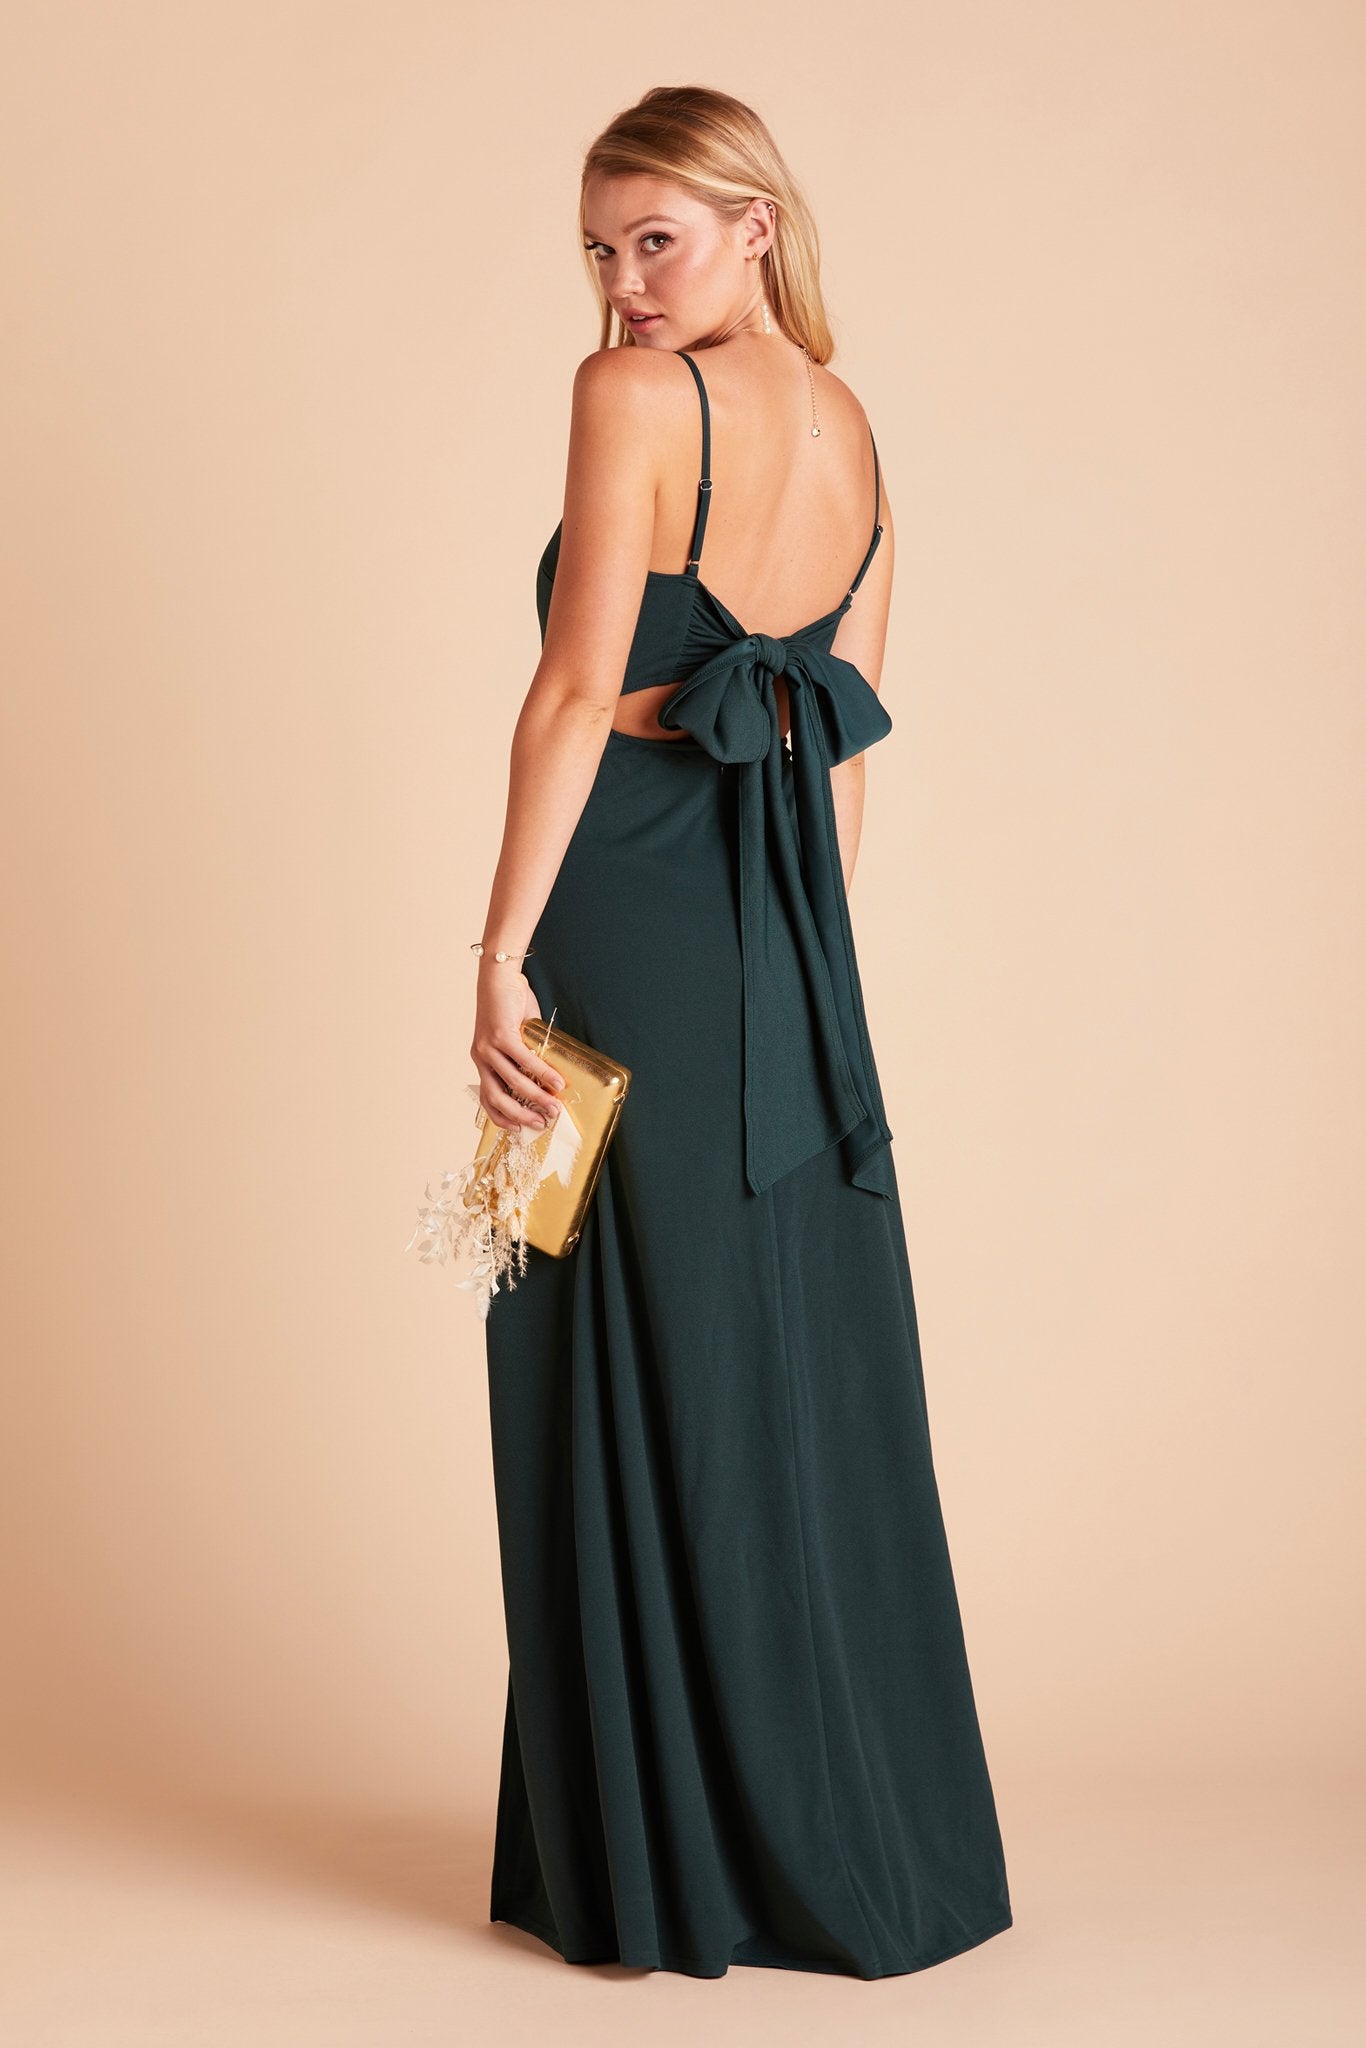 Benny bridesmaid dress in emerald green crepe by Birdy Grey, side view